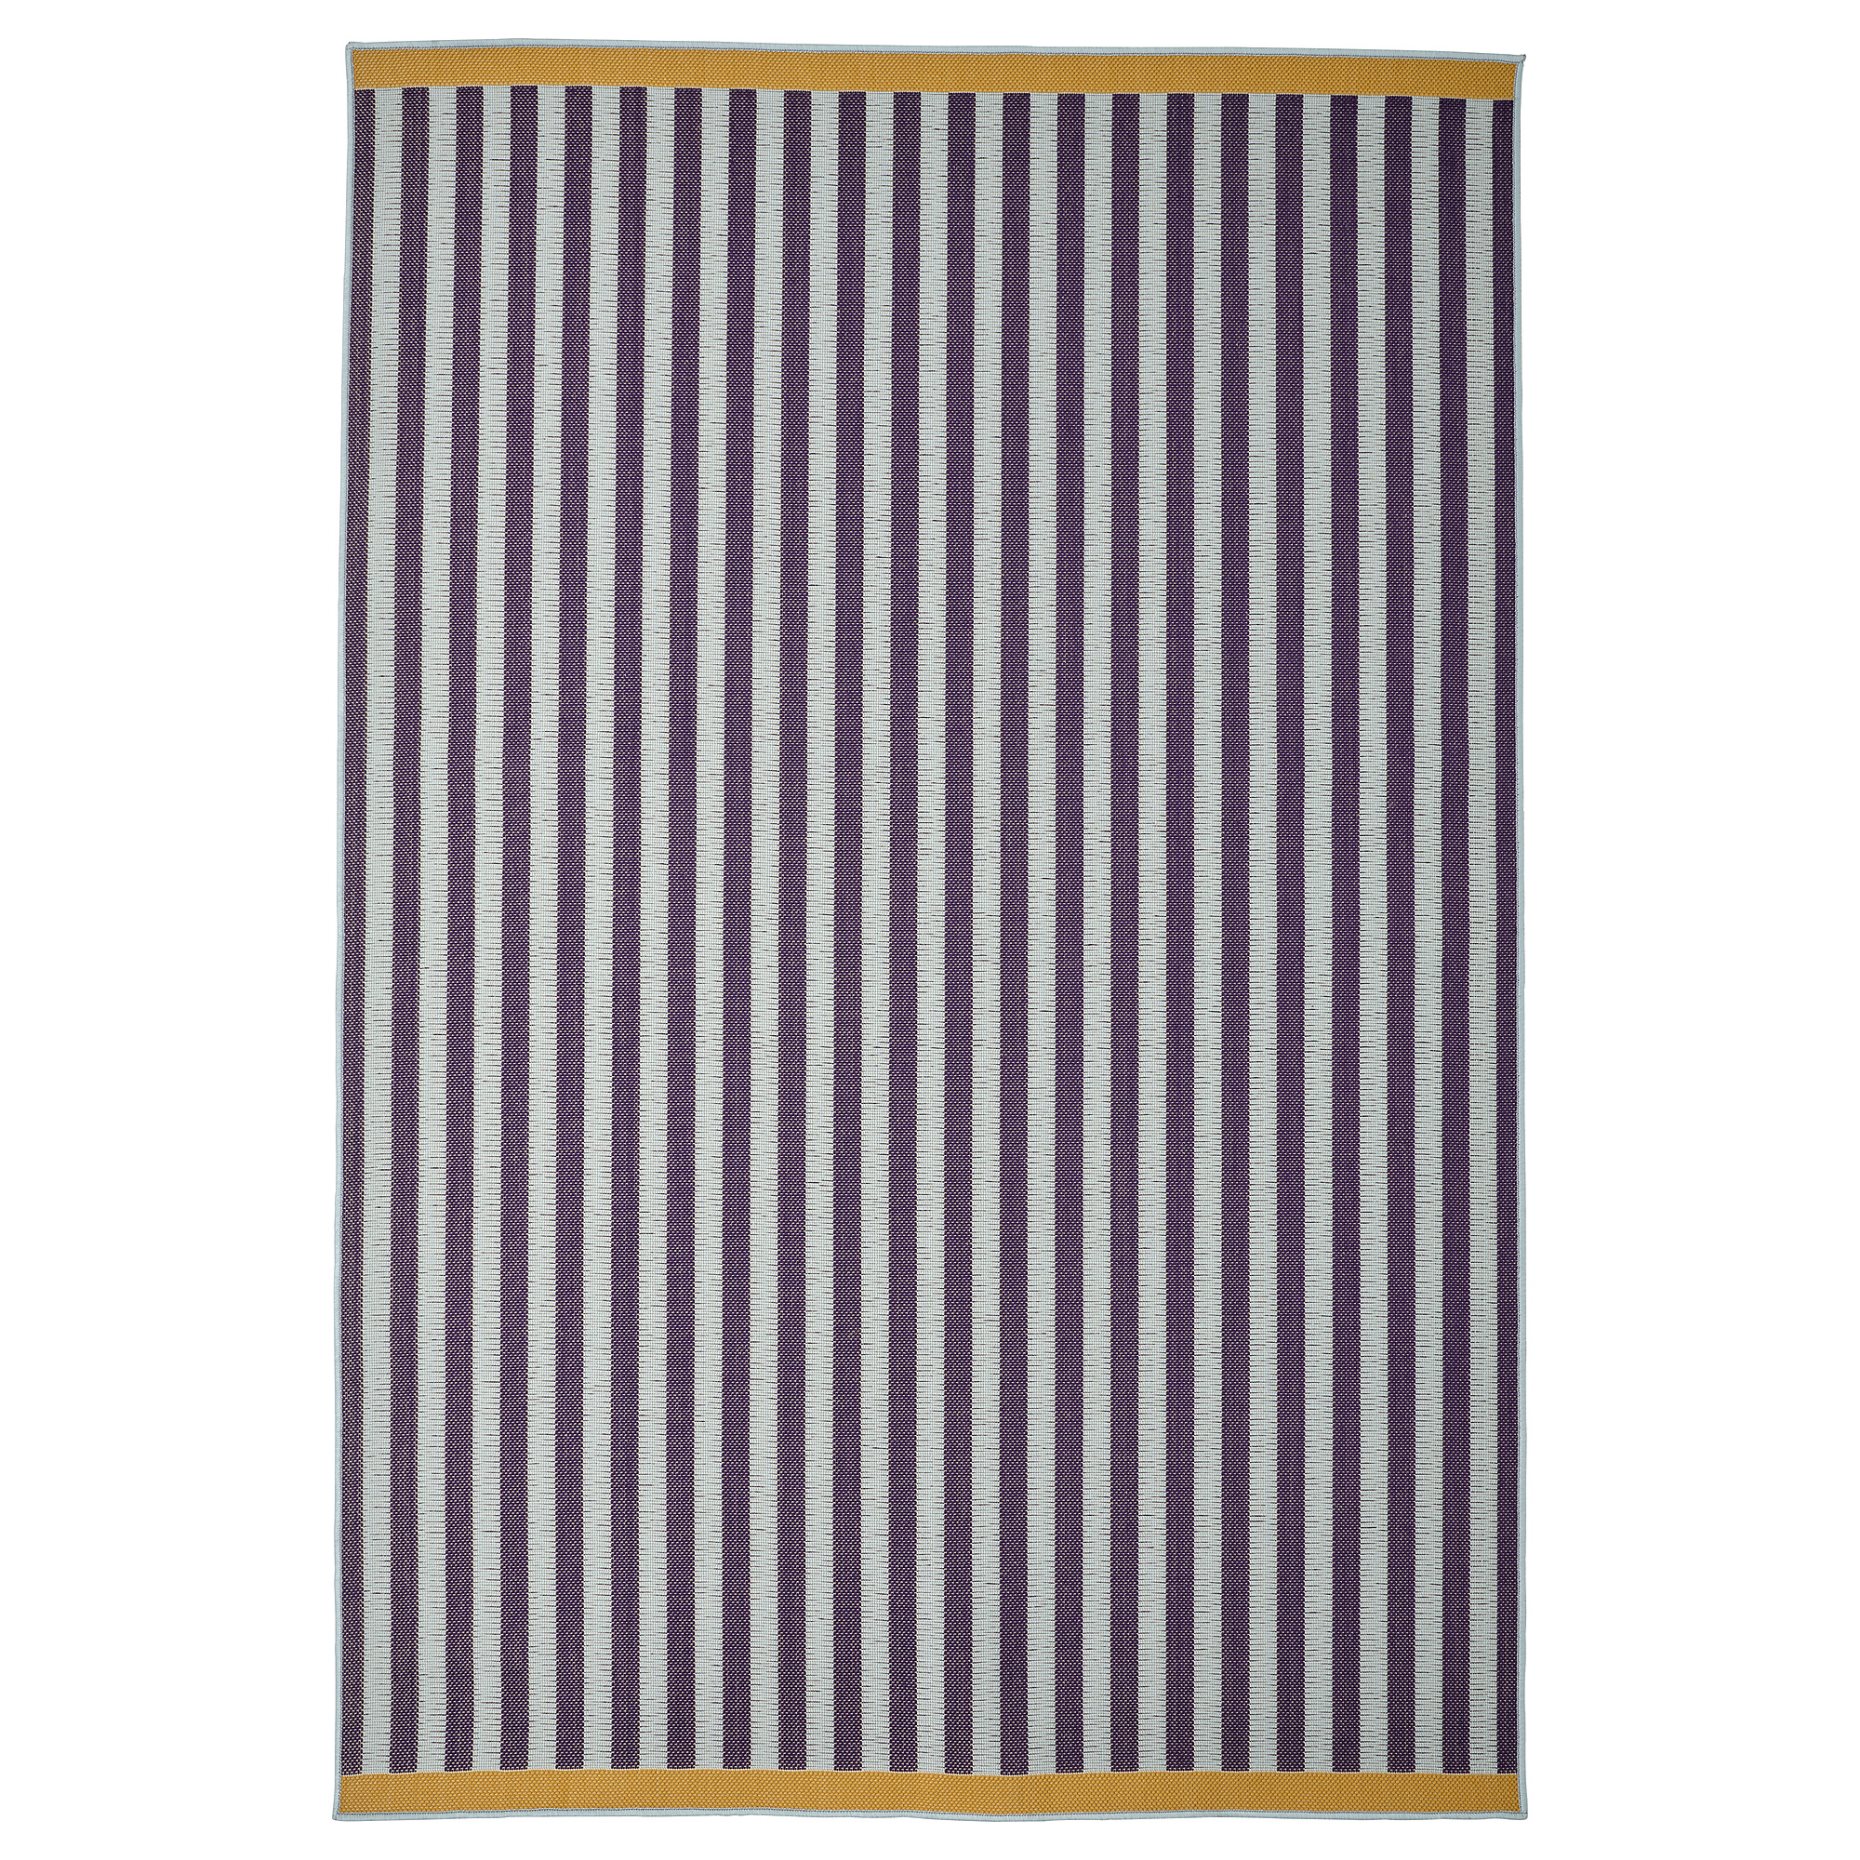 KORSNING, rug flatwoven/in/outdoor/striped, 160x230 cm, 005.519.64